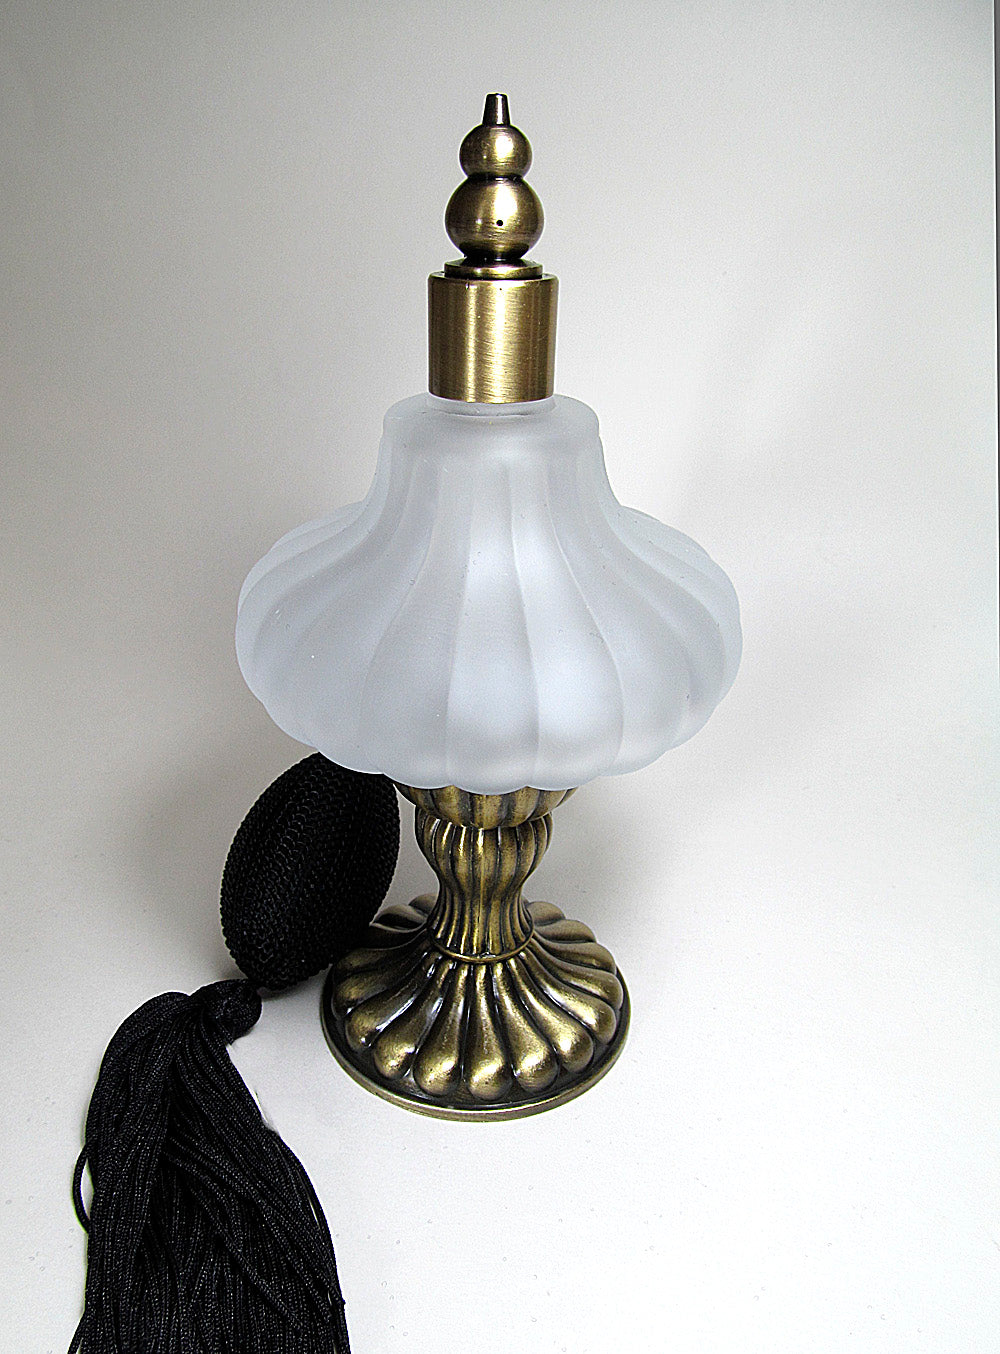 Mouth blew art perfume bottle with bronze stand and black tassel spray mounting.